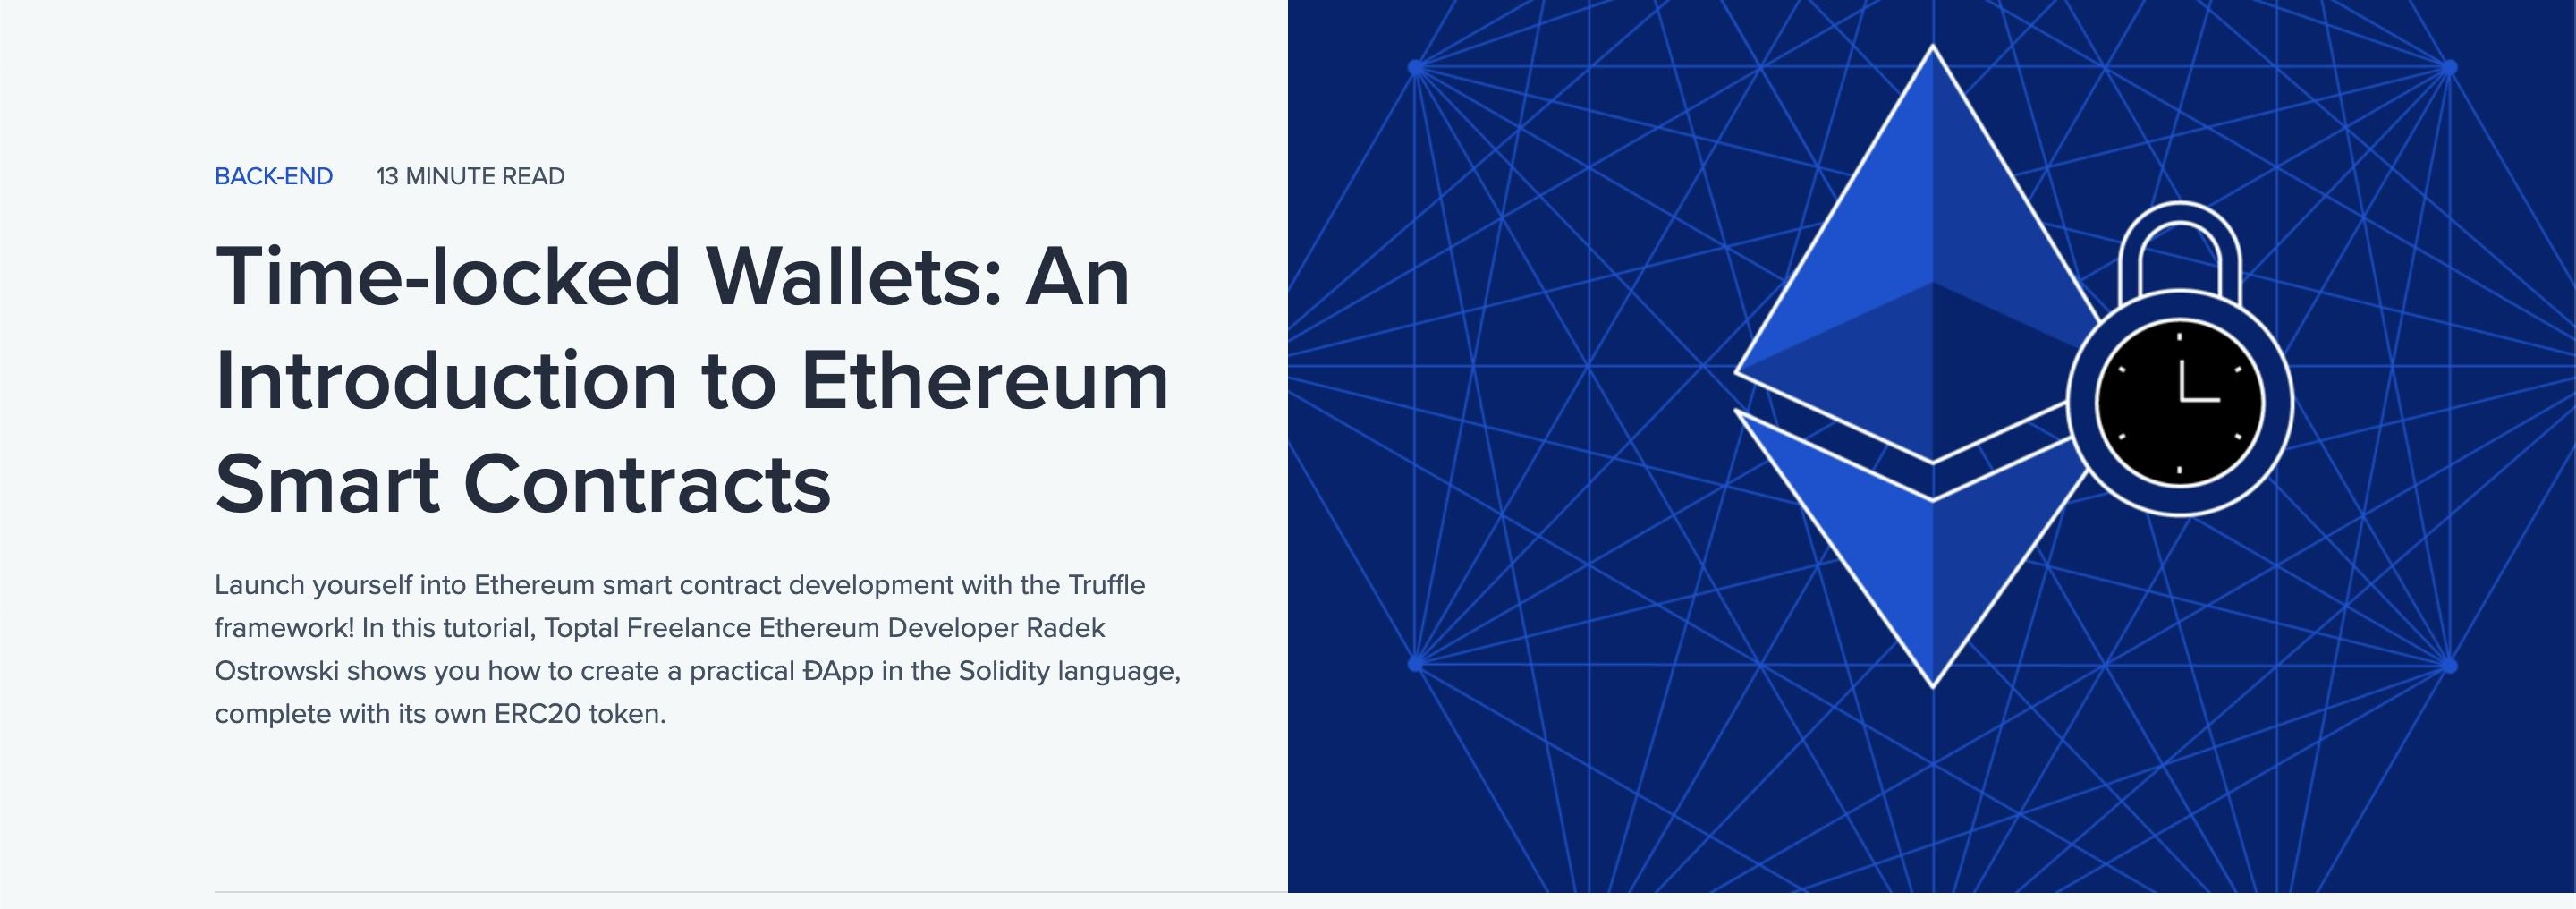 Time-locked Wallets: An Introduction to Ethereum Smart Contracts